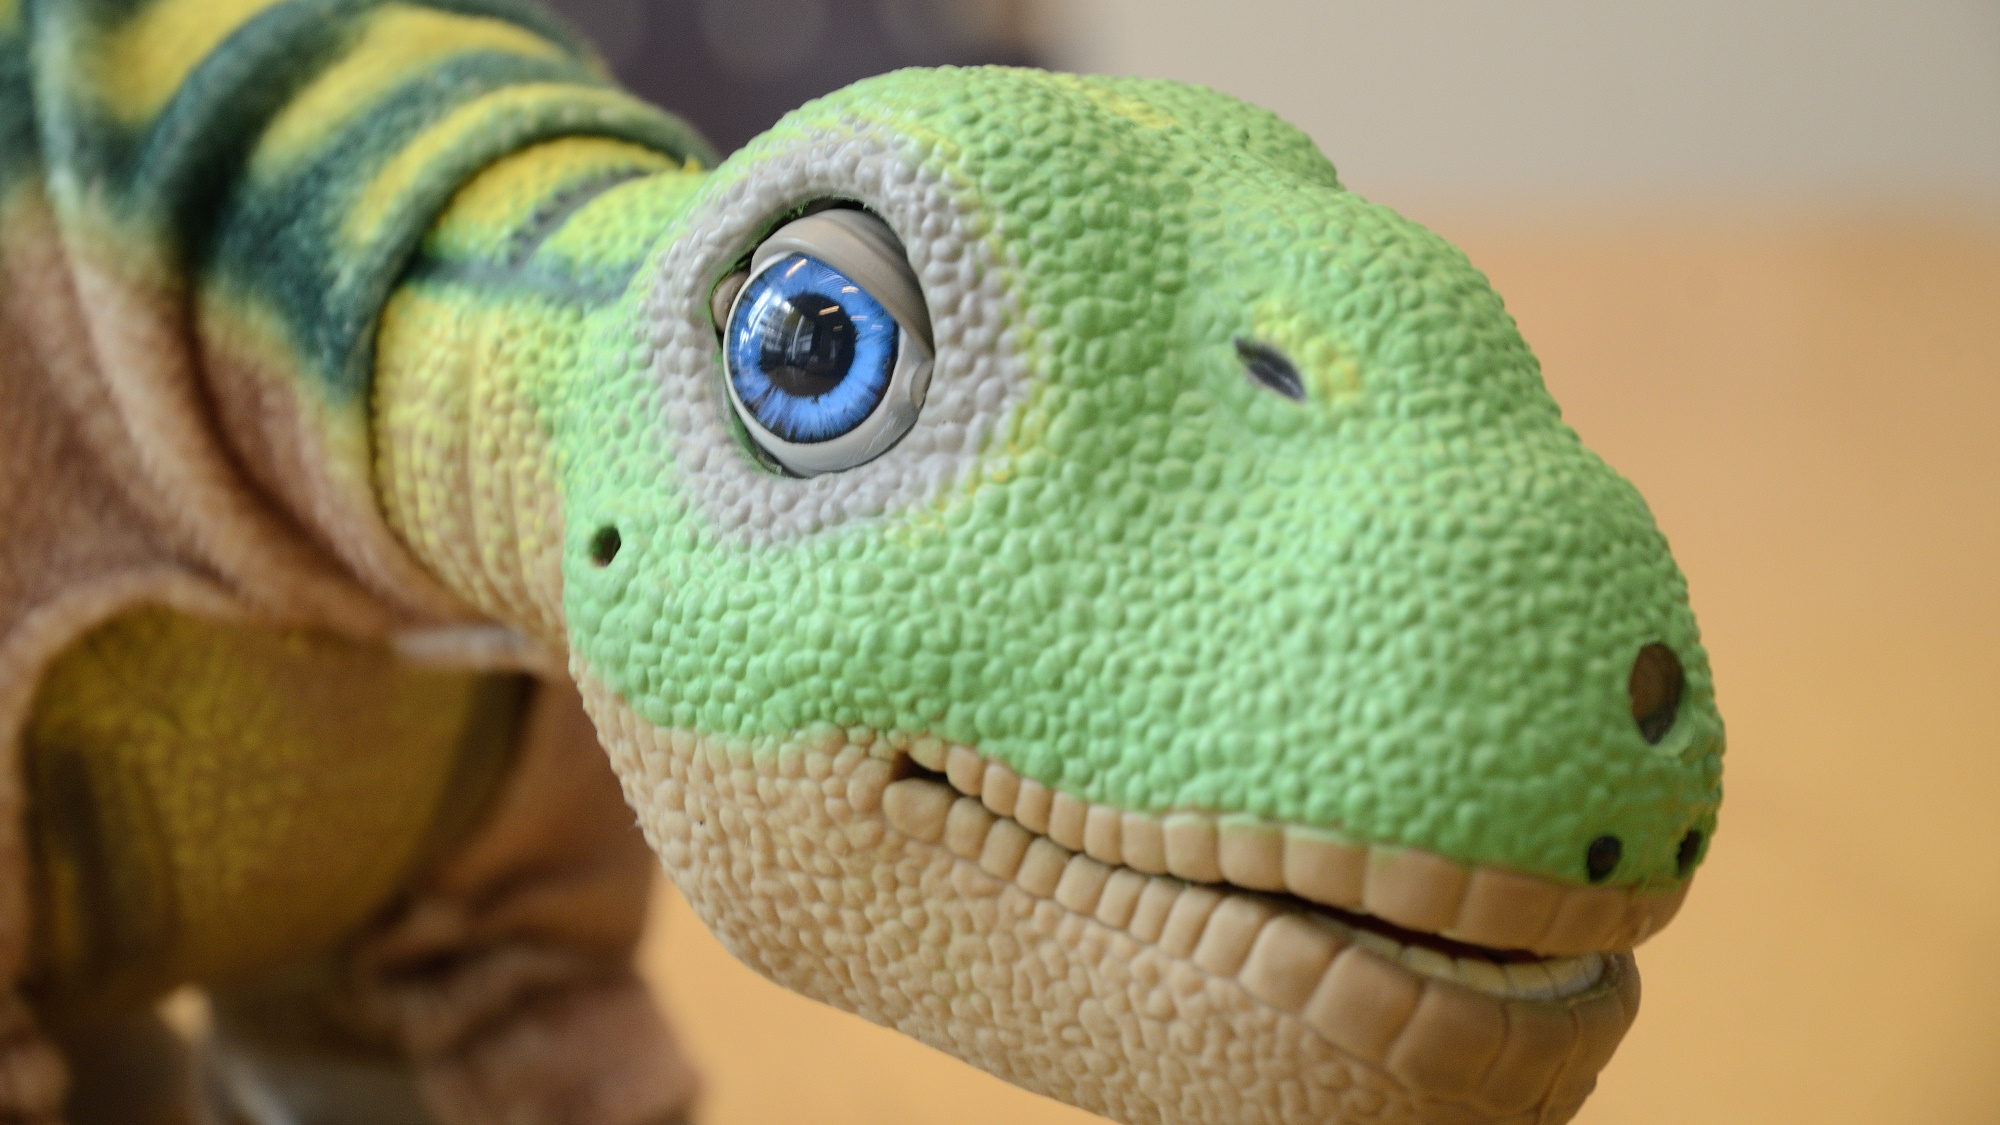 A Pleo robot has large, expressive and movable eyes.